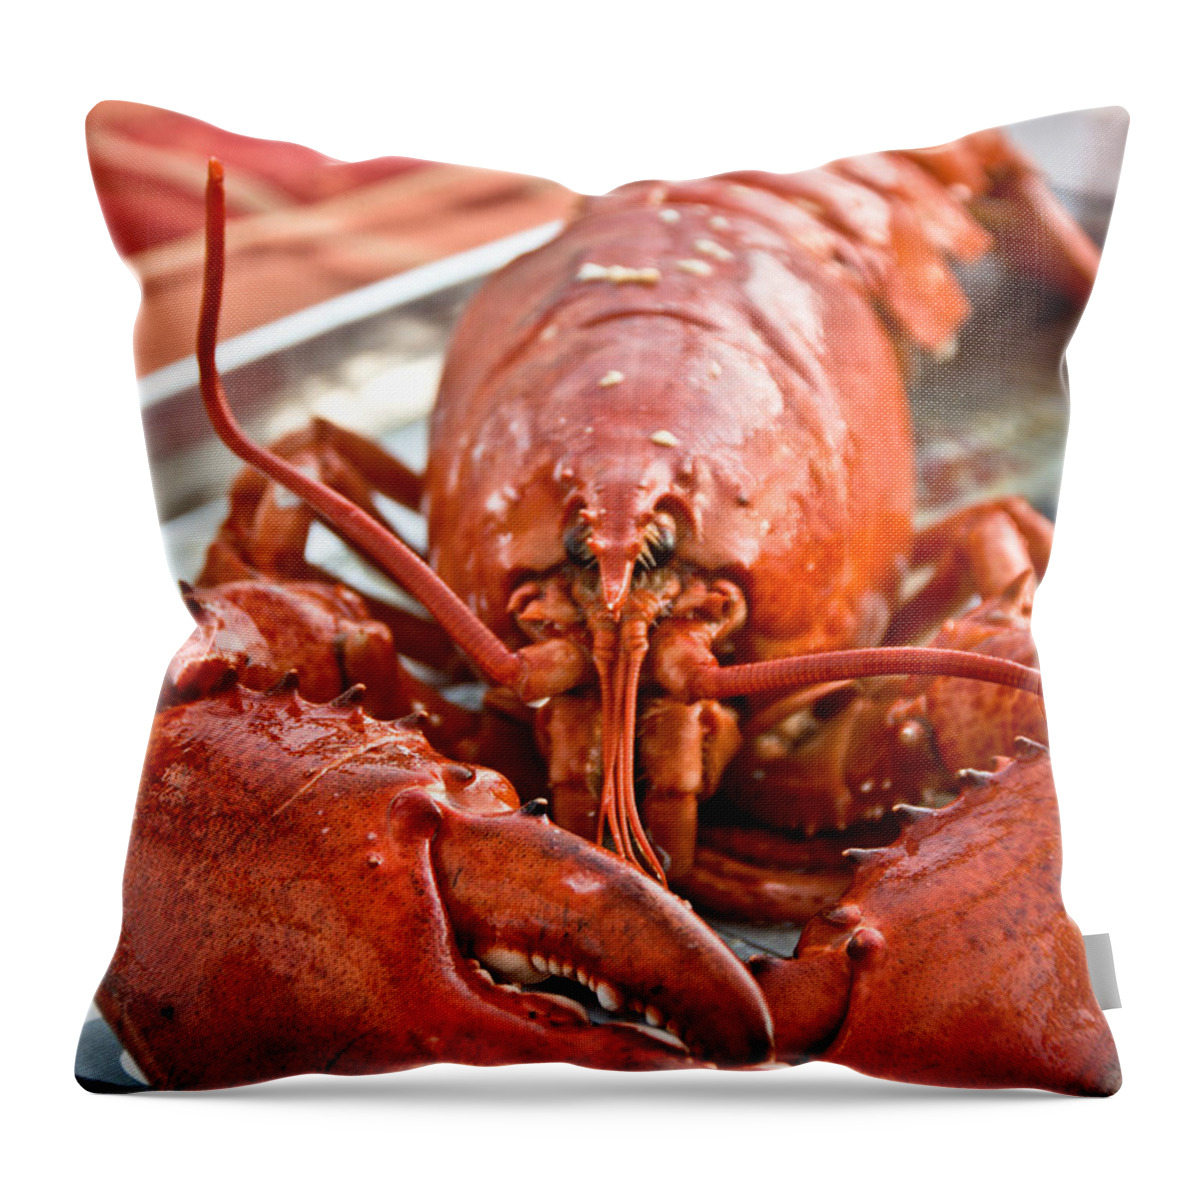  Throw Pillow featuring the photograph Lobster Dinner by Cheryl Baxter